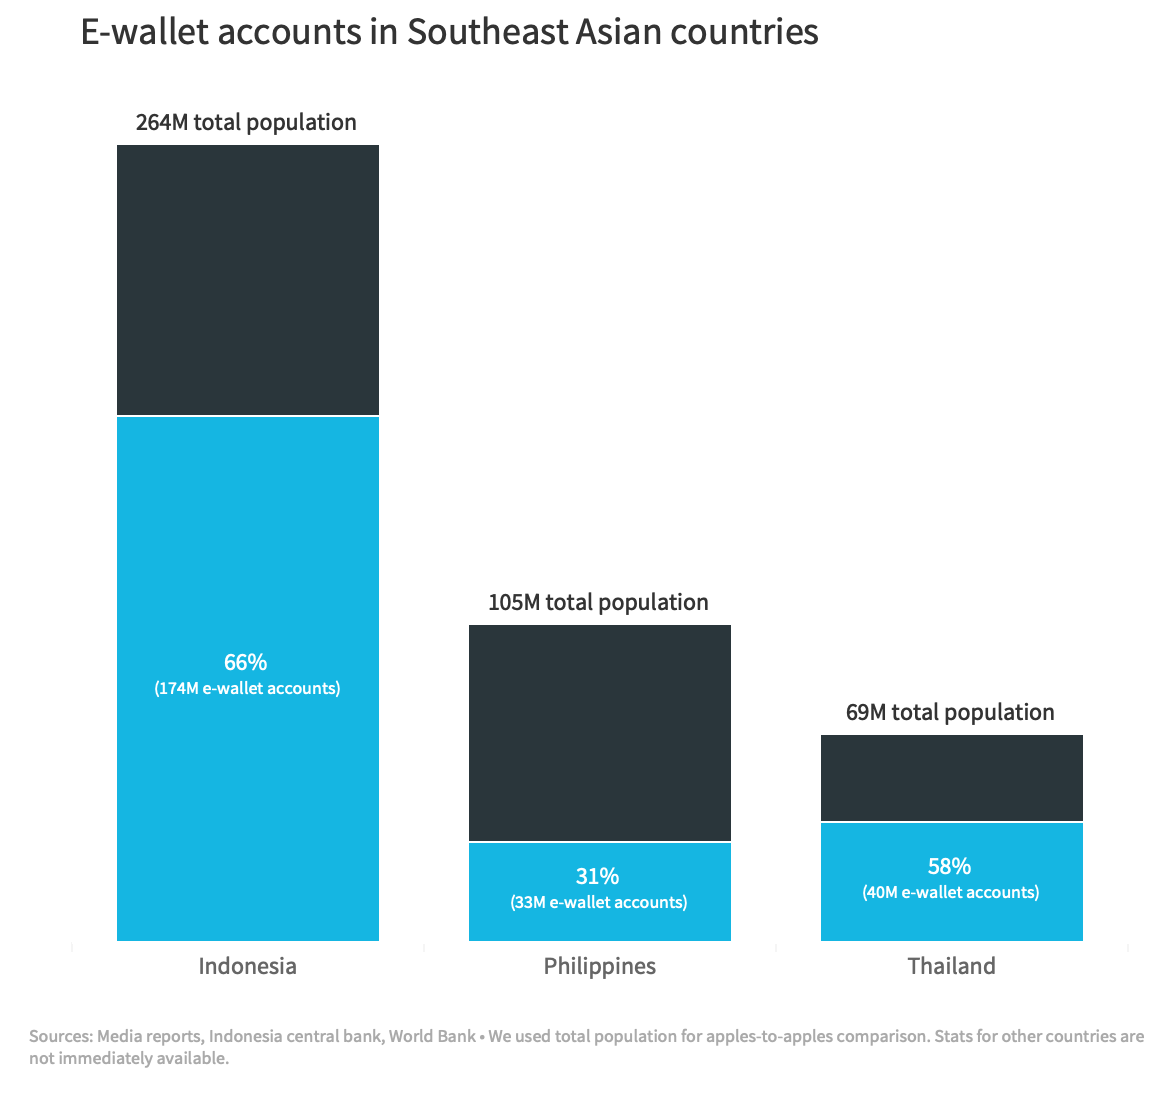 Why the Philippines has been slow to adopt e-wallets